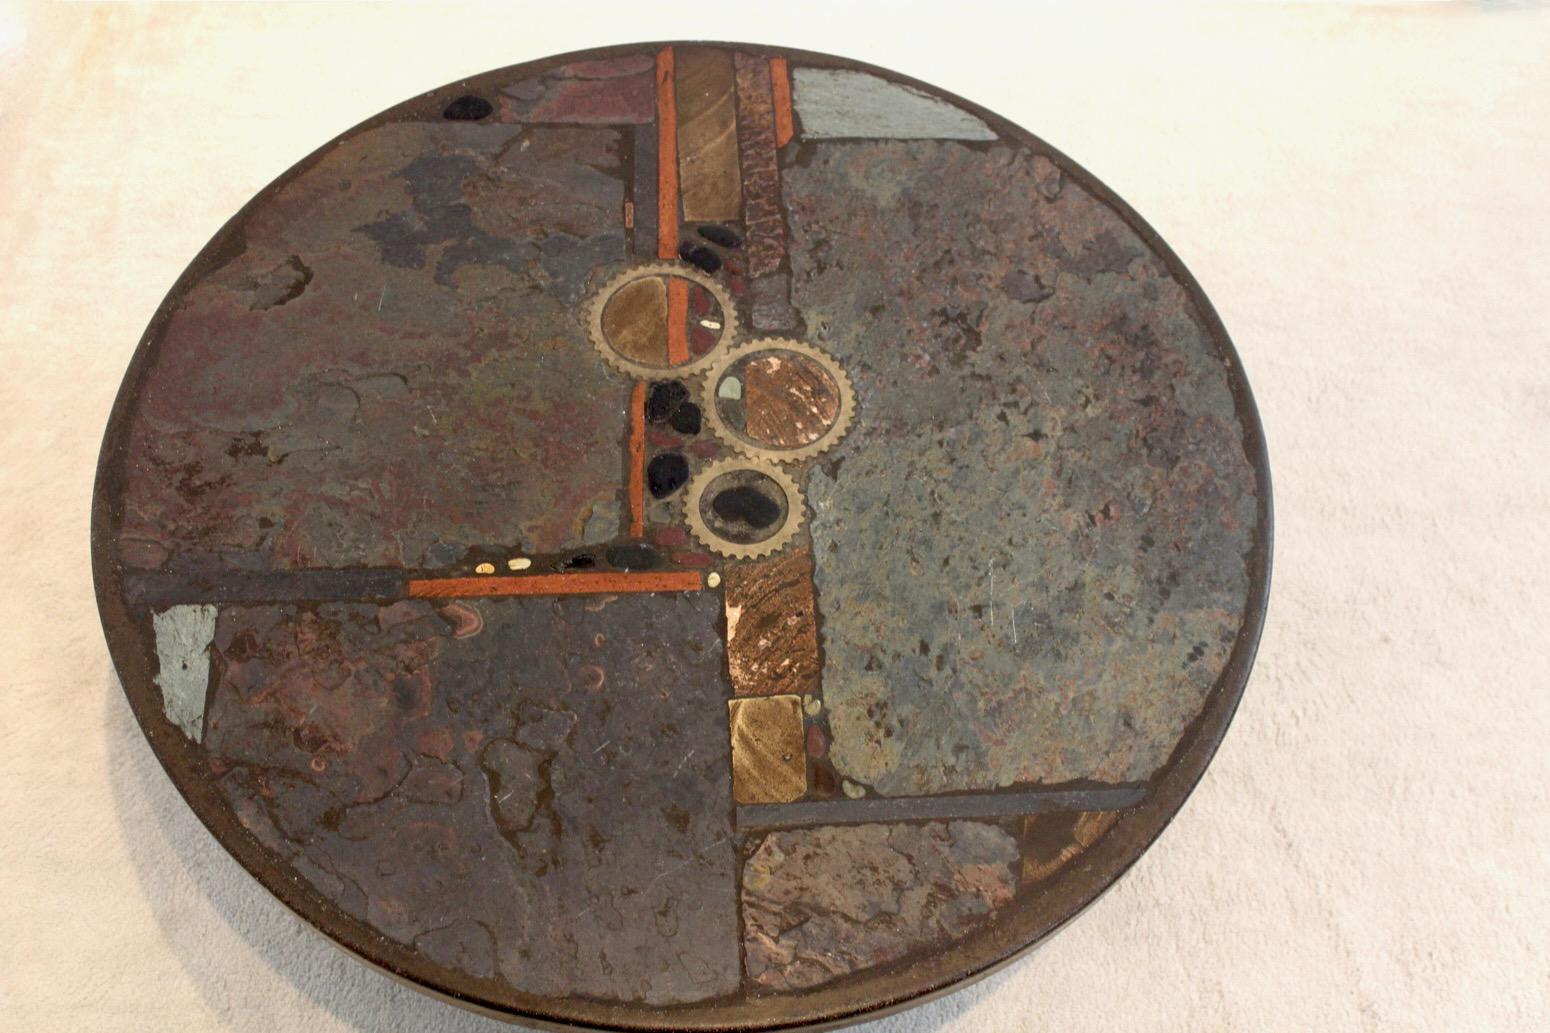 Fantastic and Unique Paul Kingma Art Slate Coffee Table with Metal Foot. Made and signed in the ‘80s for a client in the Netherlands. The table comes from the first owner and is signed ‘KINGMA’ on a copper tag inset into the tabletop. No other Table